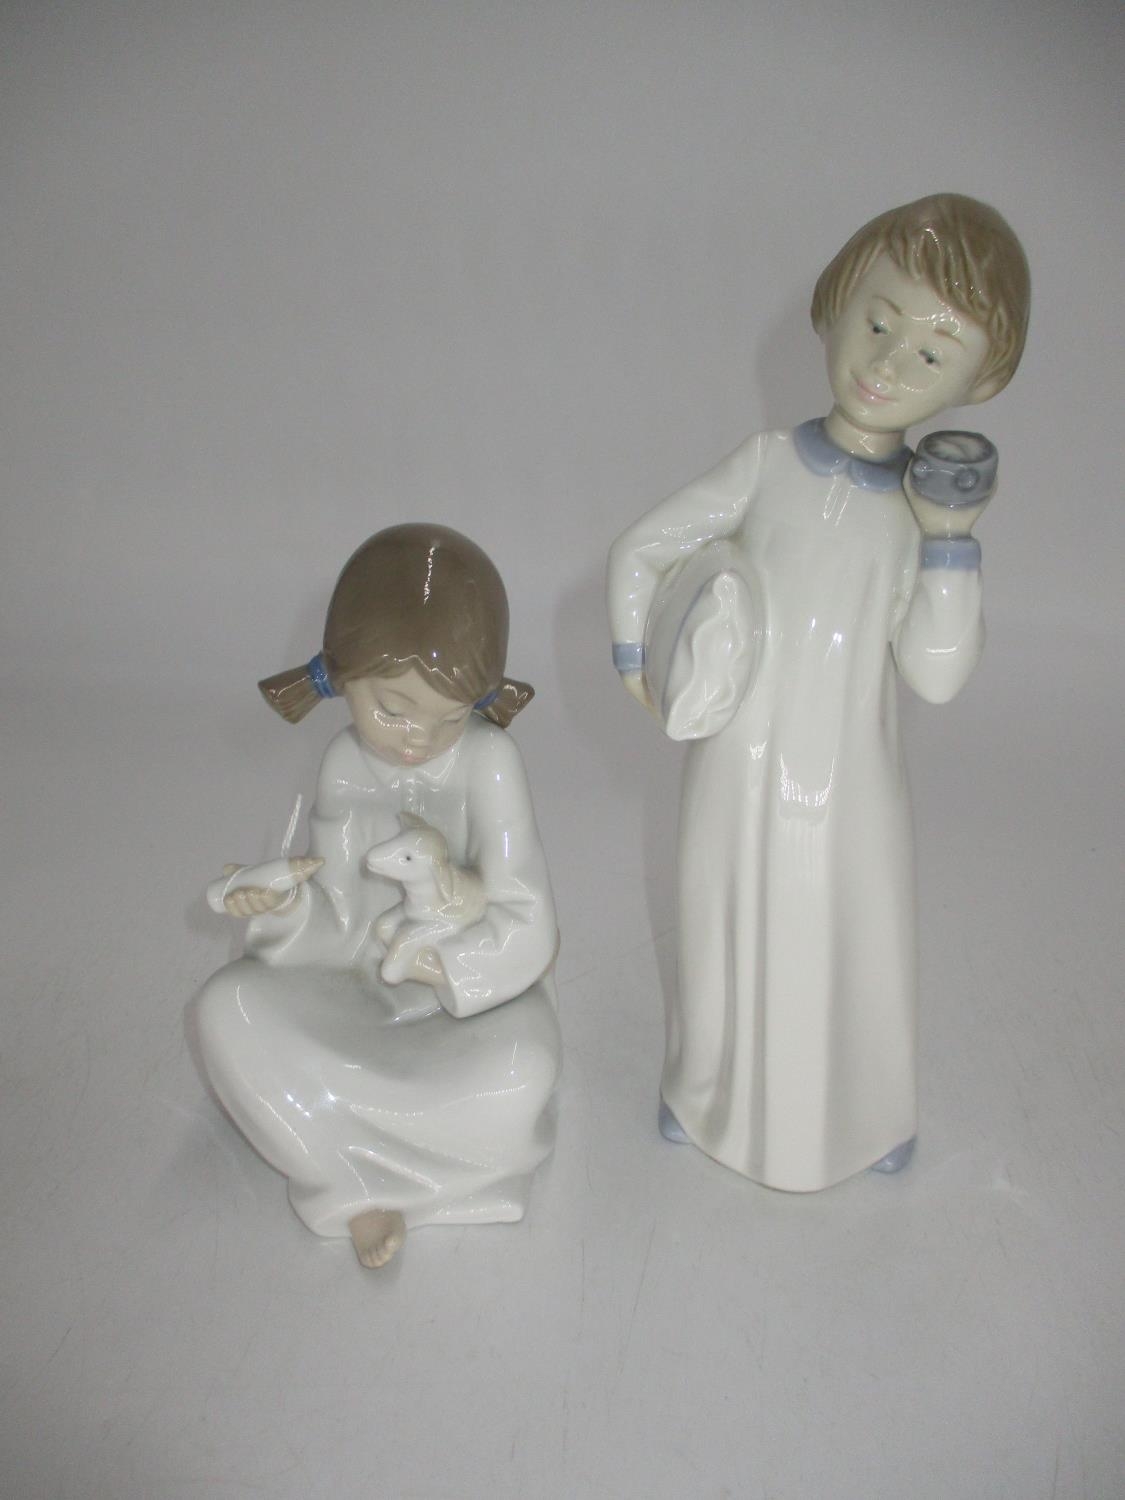 Two Nao Figures, Girl with Lamp and Boy with Pillow and Clock